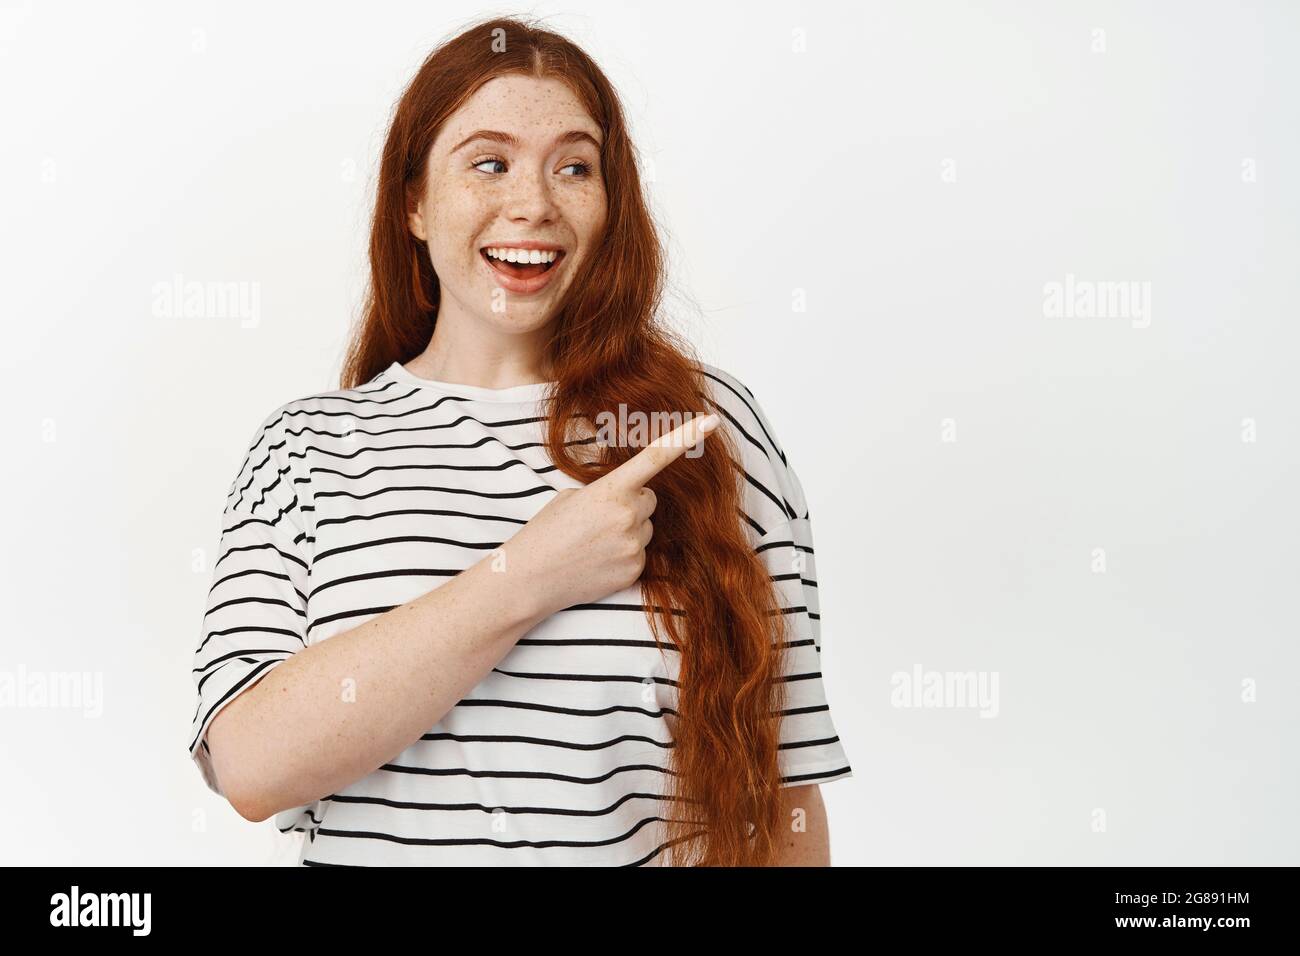 Portrait of pretty teen girl with long red hair, laughing, smiling while pointing finger right at sale banner, showing discount copy space, standing Stock Photo